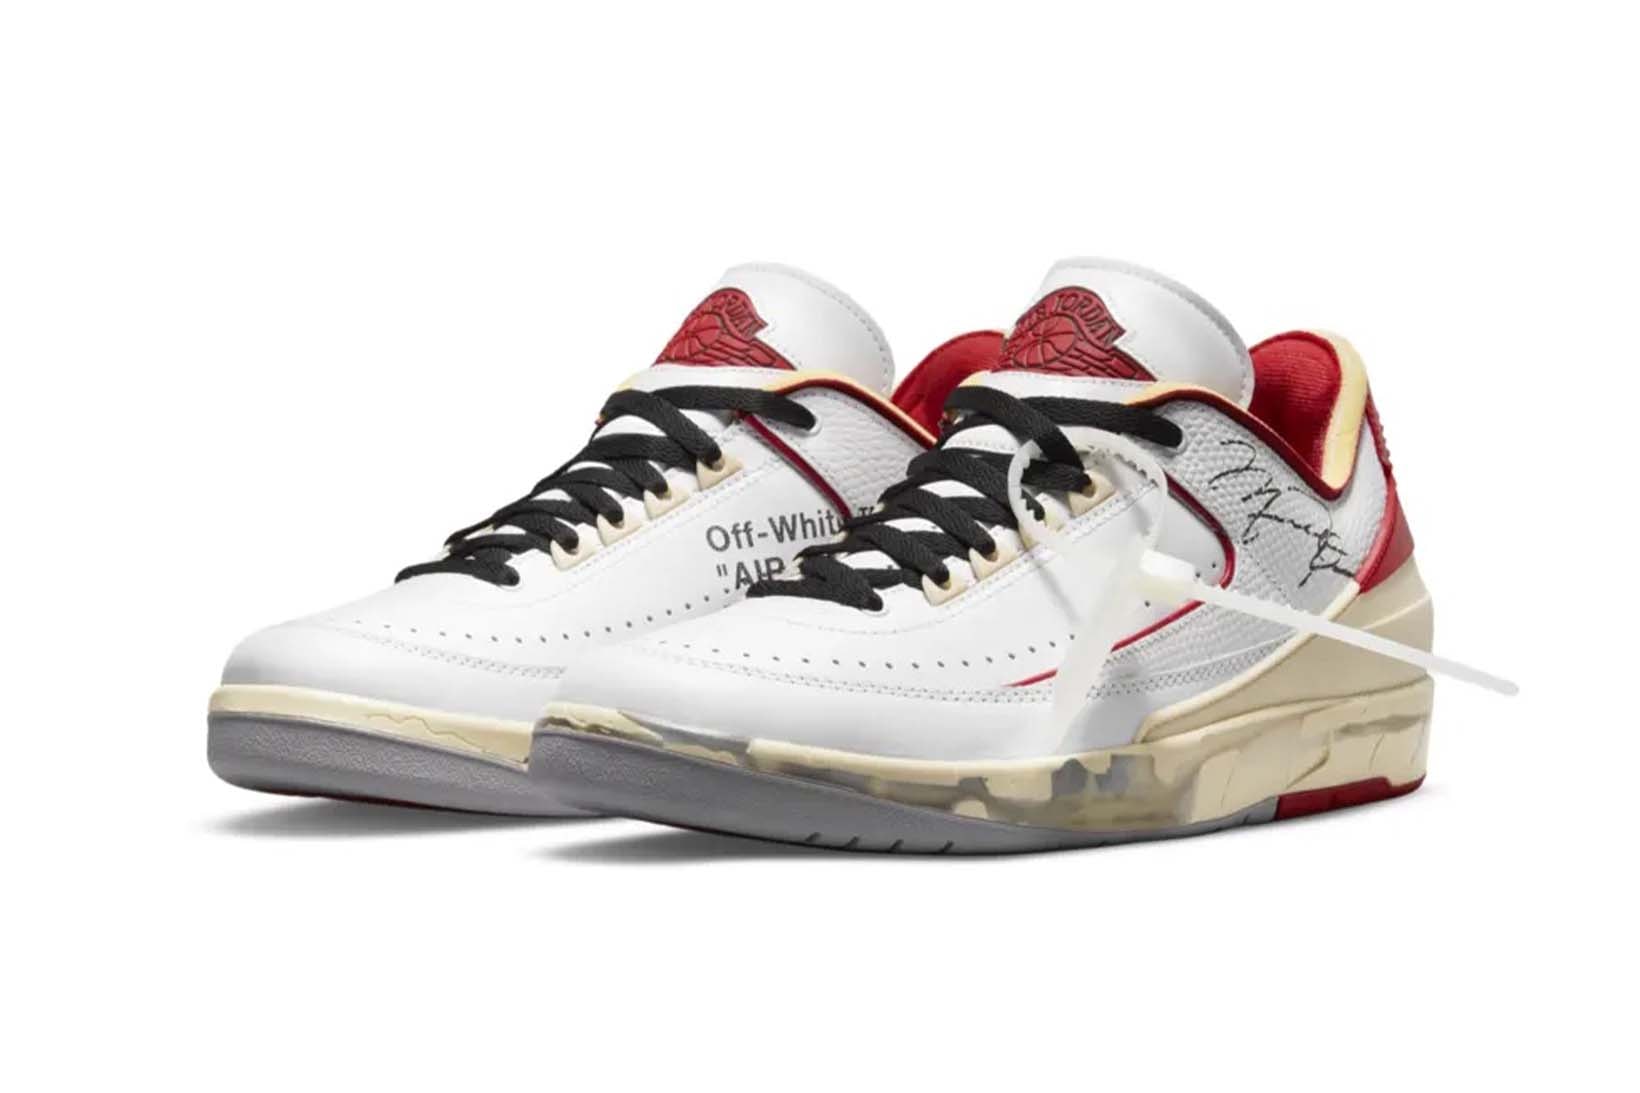 Off-White Virgil Abloh Jordan 2 White/Red Crumbled Sole Collaboration Release Date